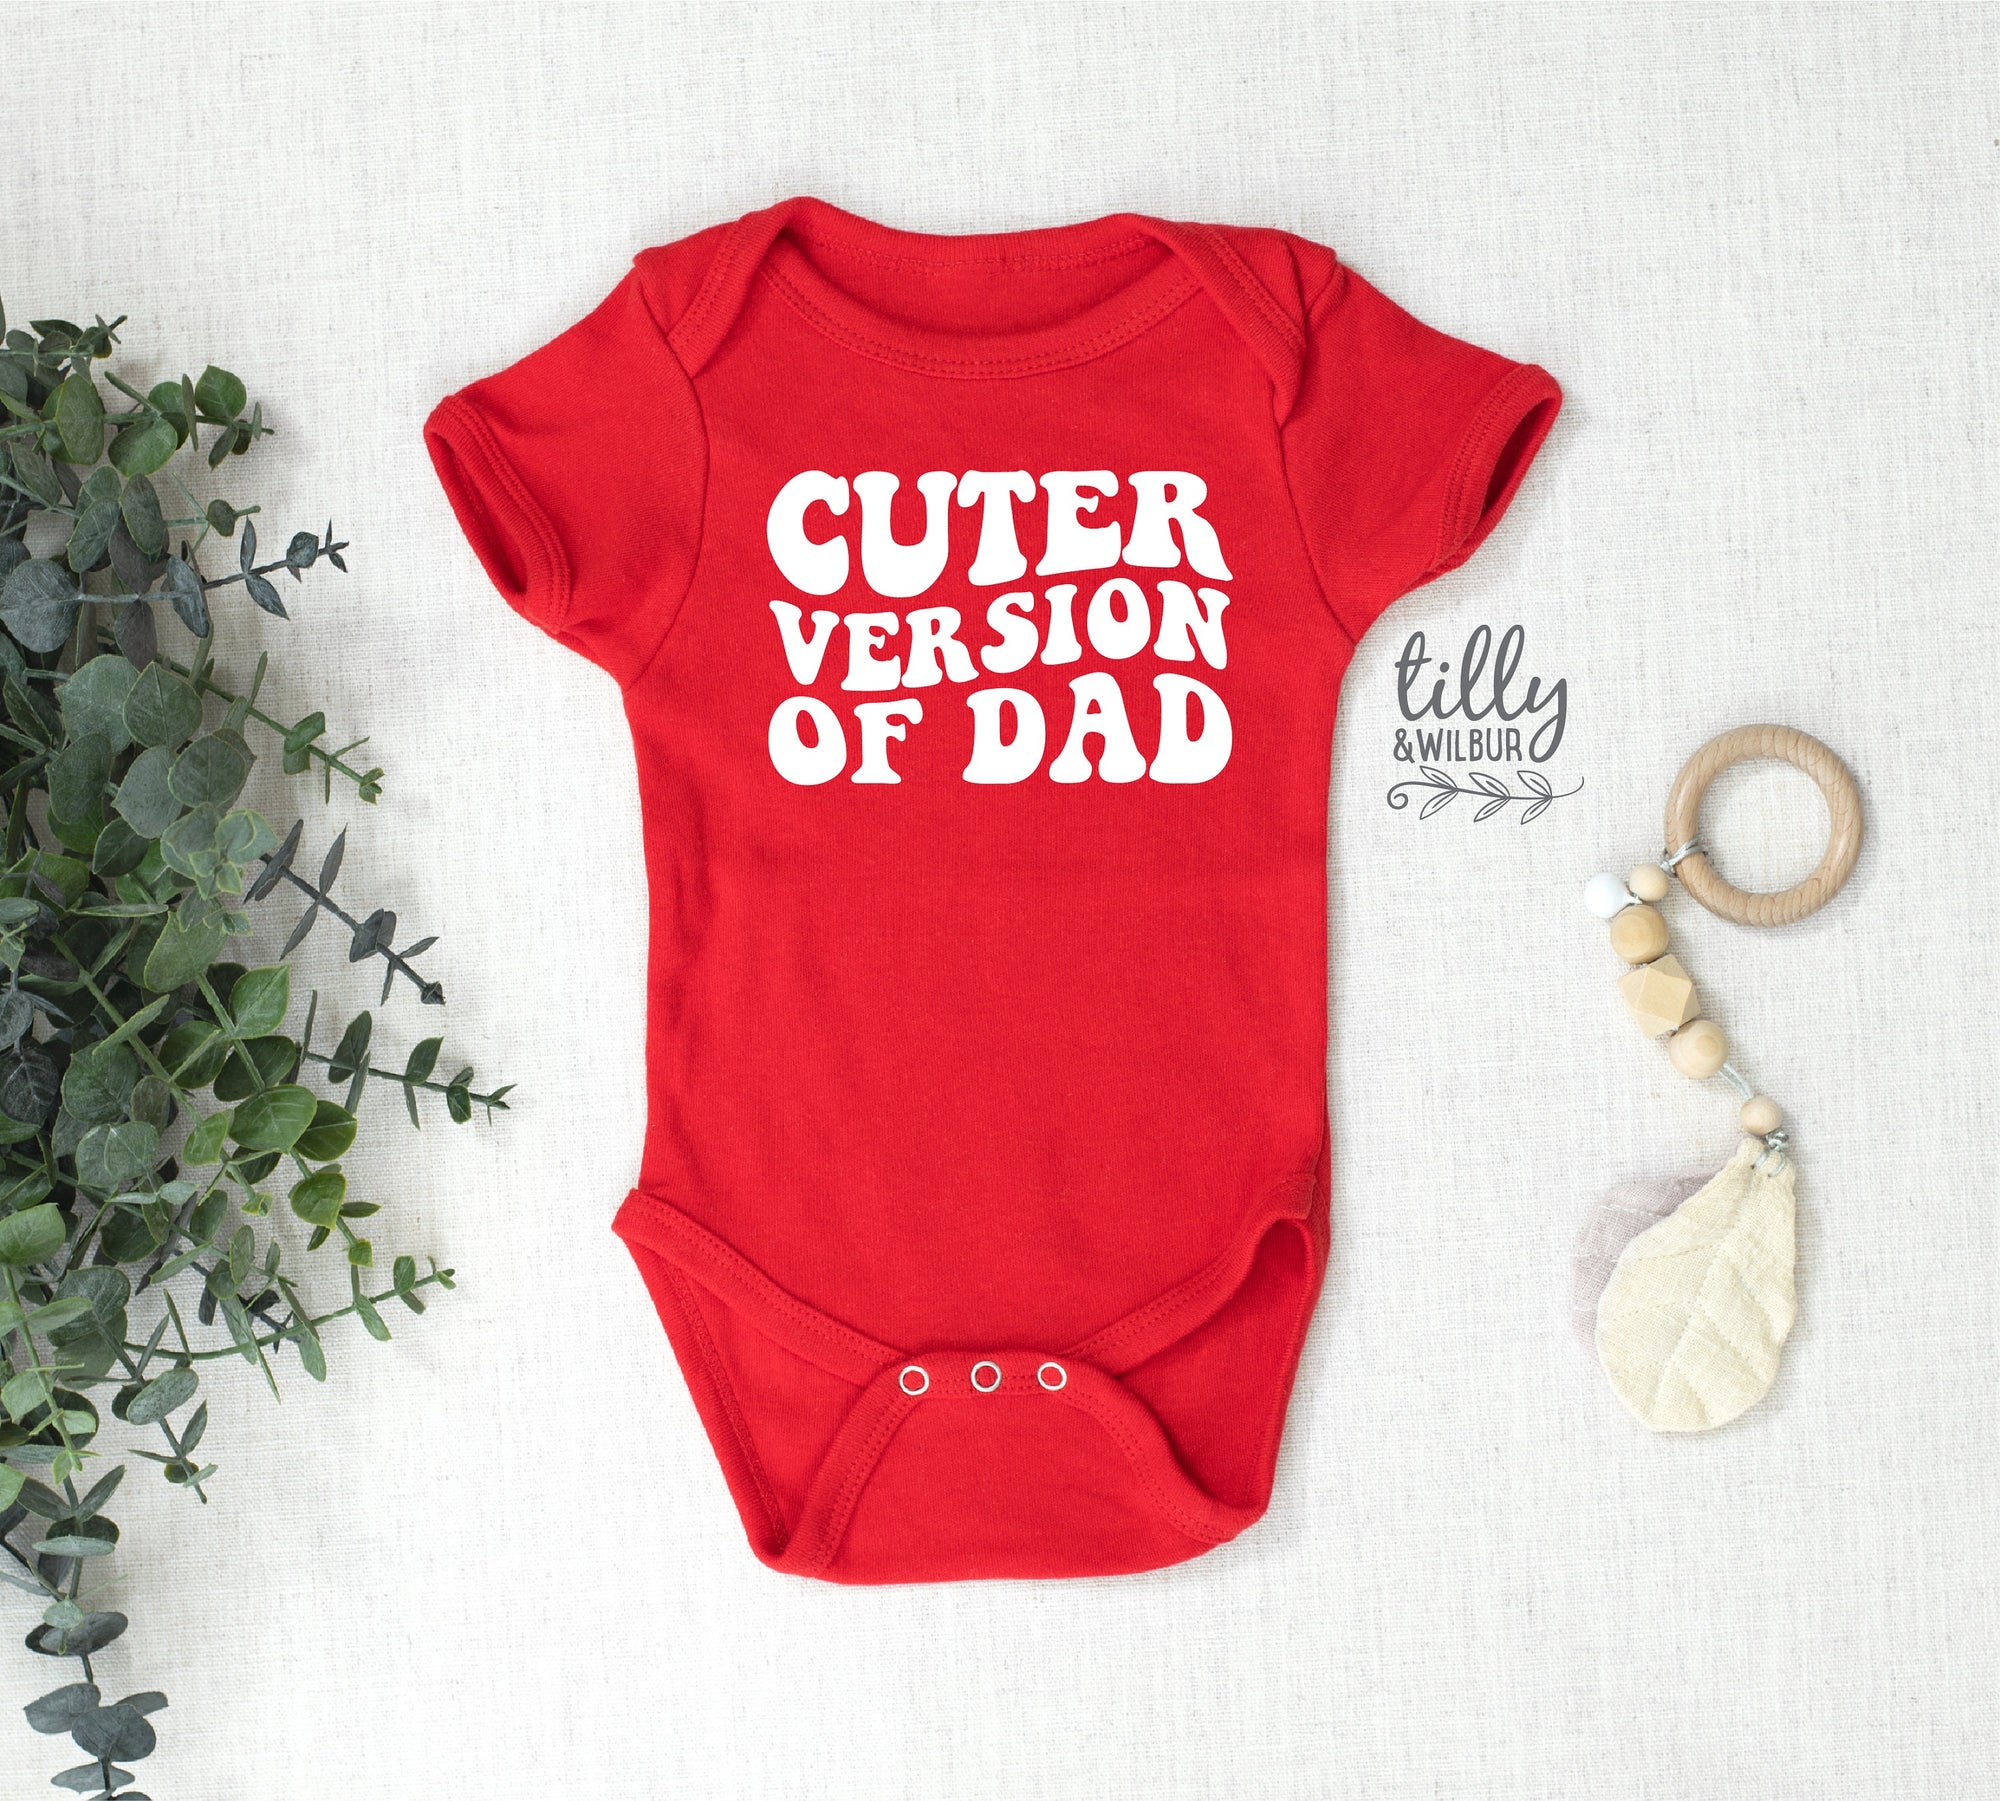 Cuter Version of Dad, Father's Day Bodysuit, Baby Outfit, Fathers Day Baby Gift, Funny Dad, Baby Gift, Unisex Baby Clothing, Cute Baby